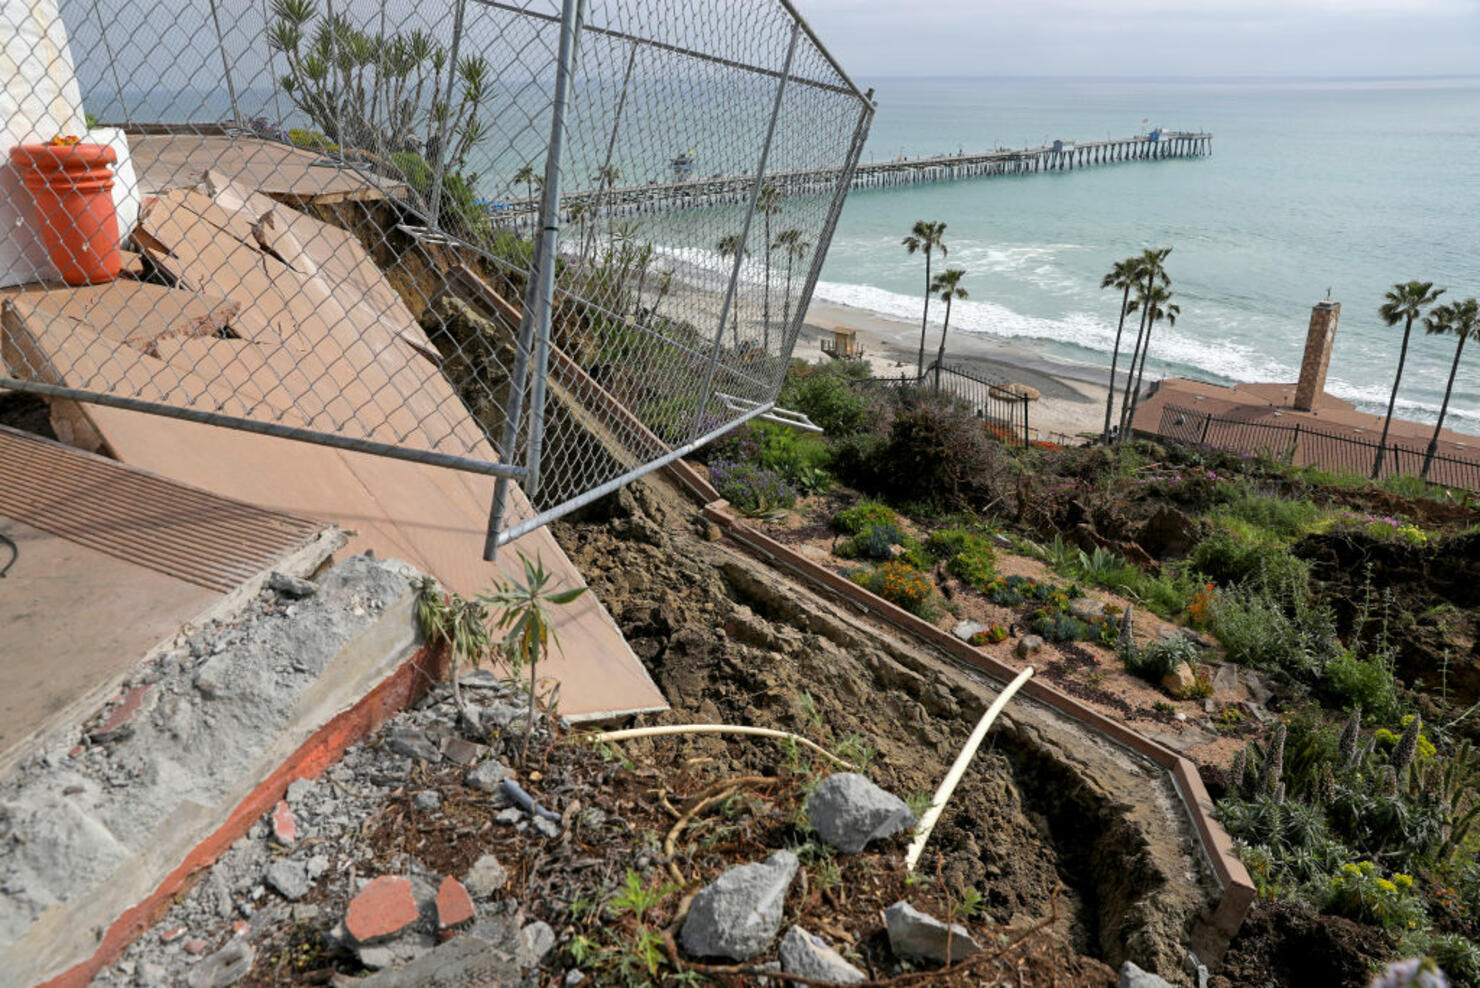 Rail service remained unavailable in southern Orange County today thanks to a landslide that damaged the historic Casa Romantica Cultural Center in San Clemente and sent dirt and debris cascading down a hillside toward coastal railroad tracks.